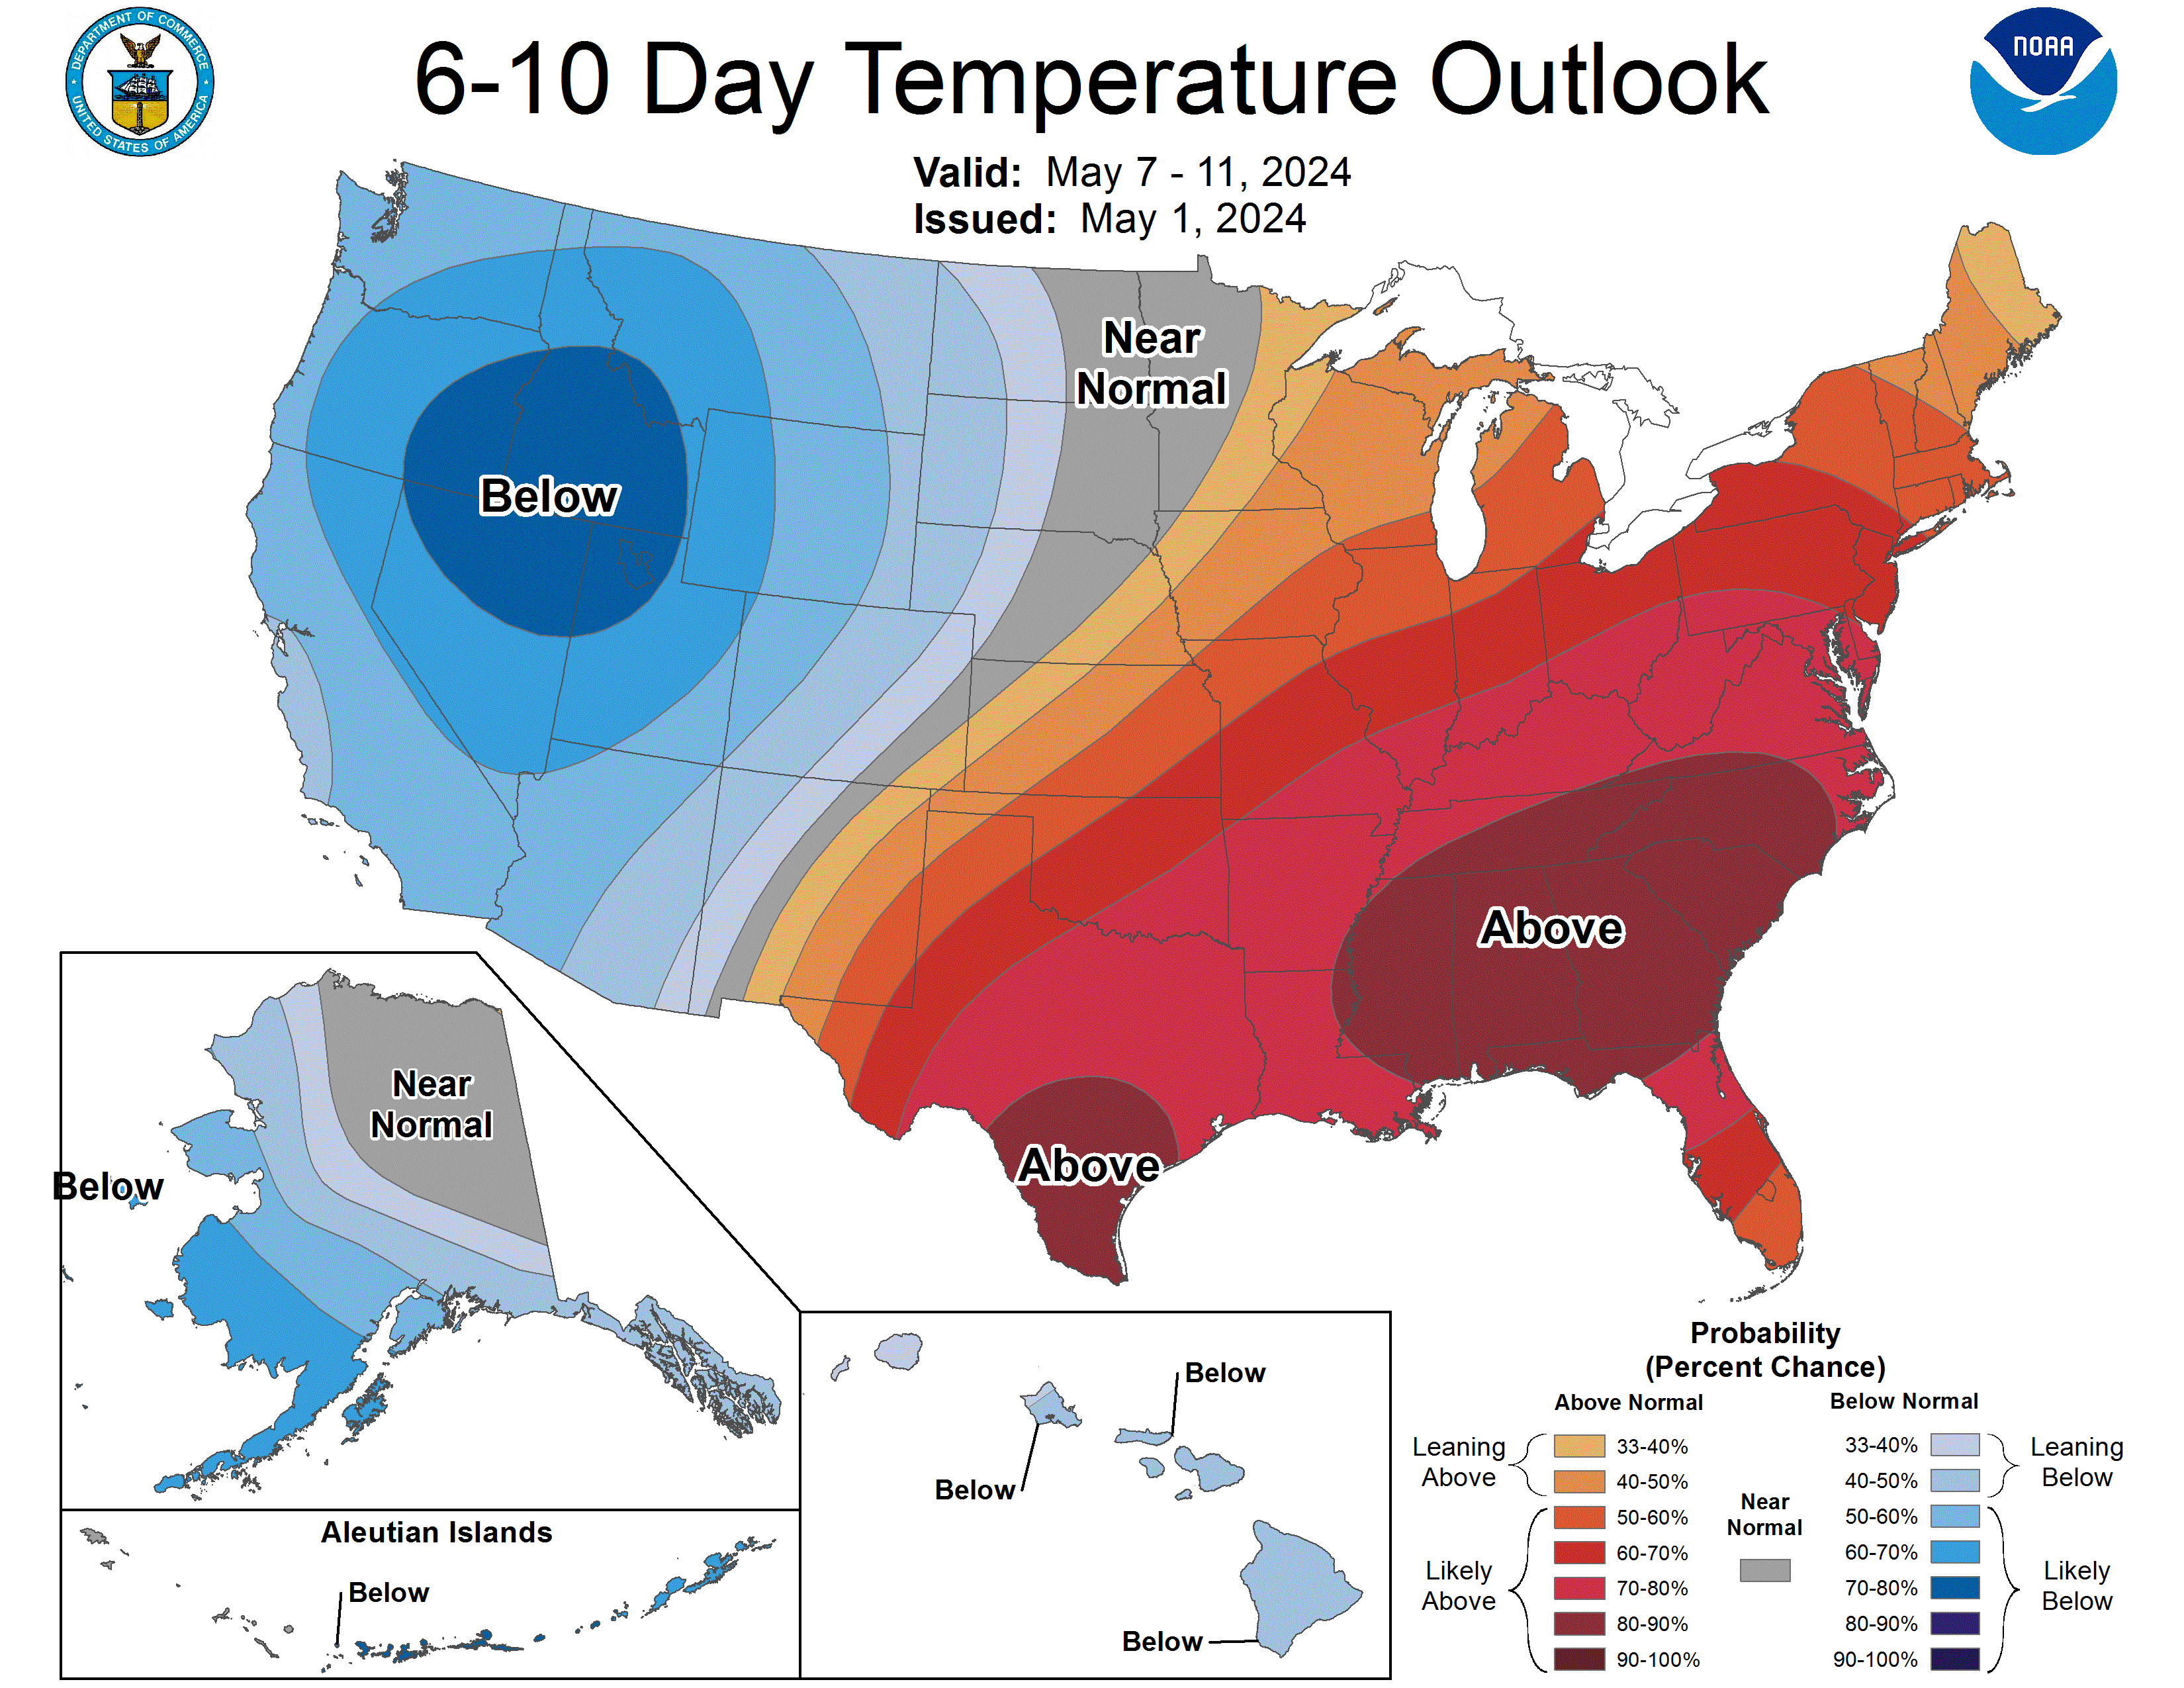 6-10 Day Temperature Outlook. Image: NOAA